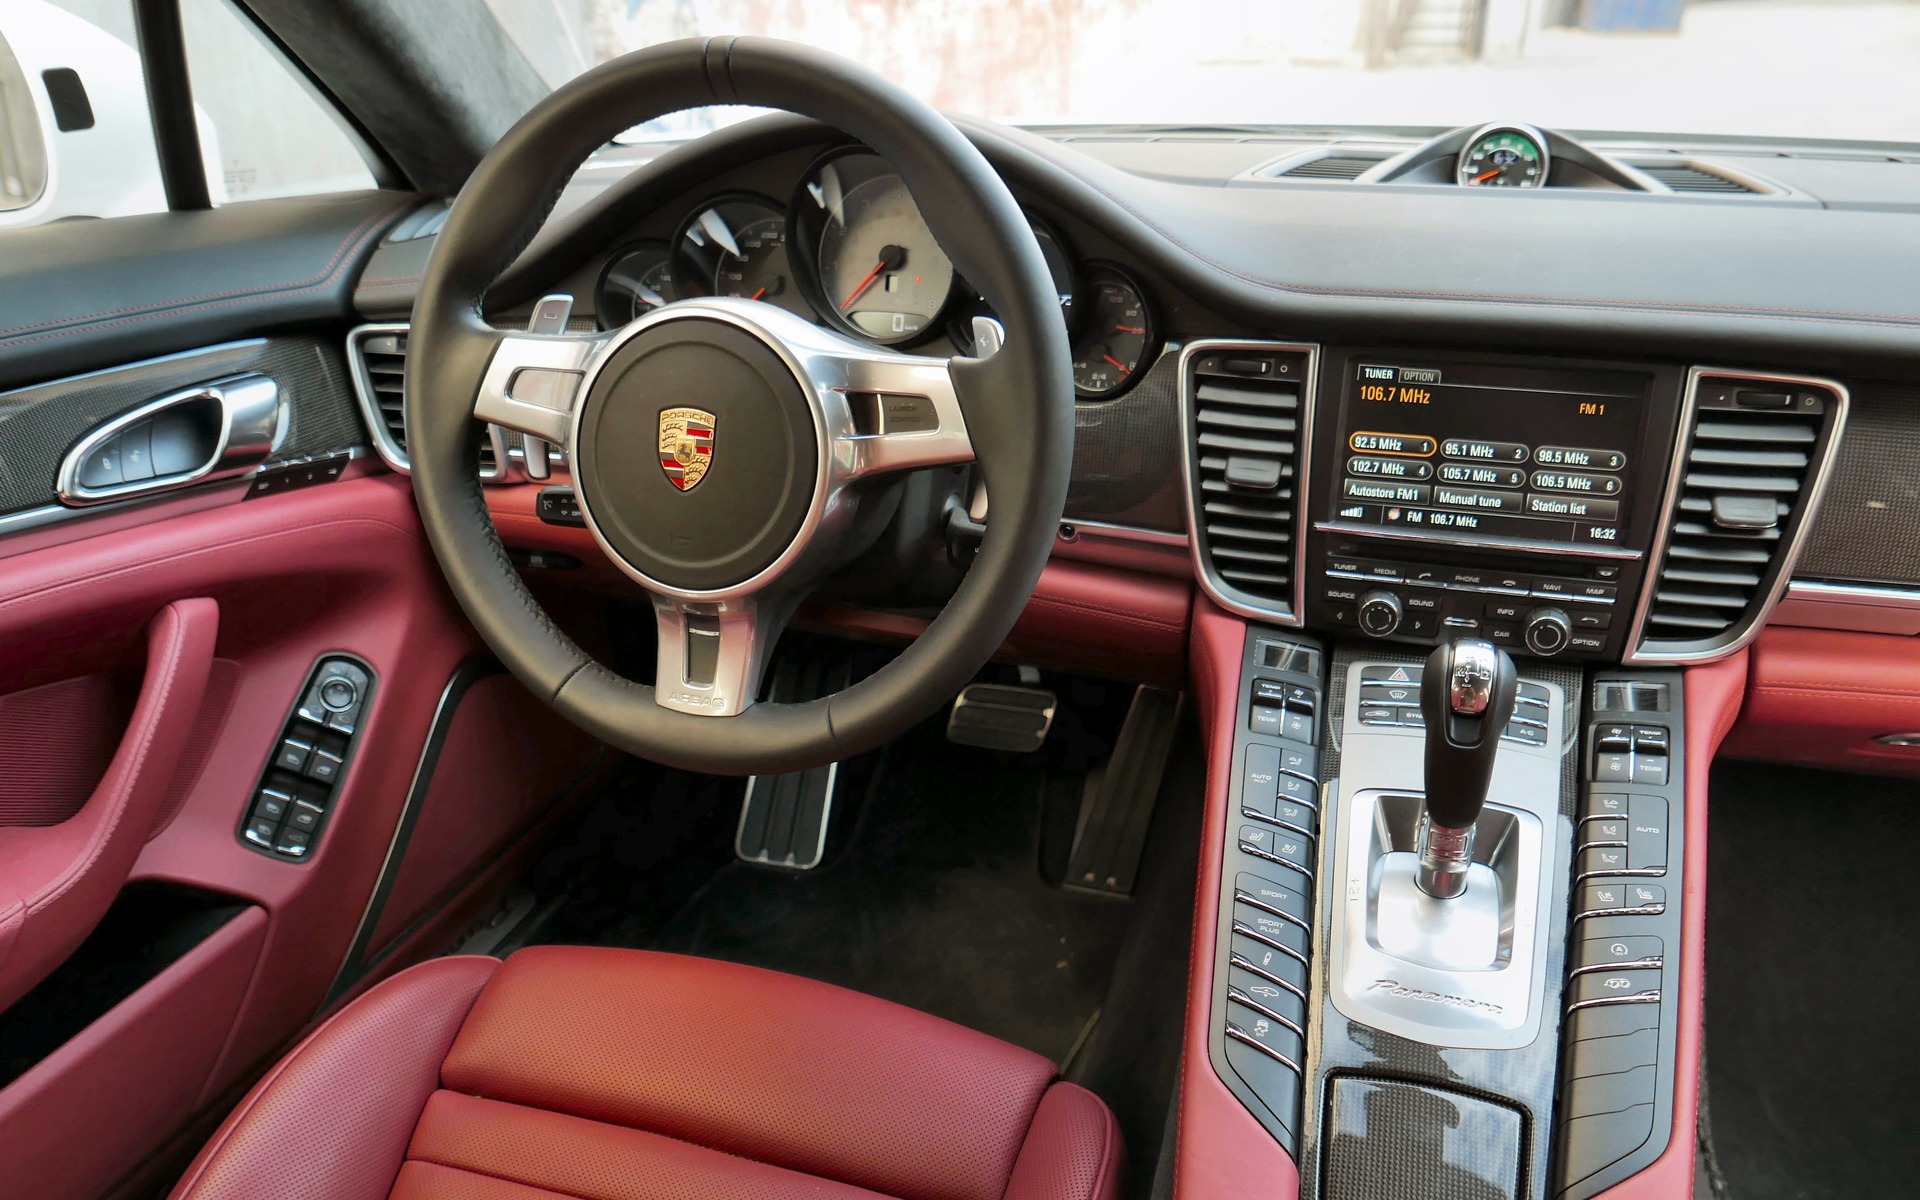 The Panamera offers an unusual driving position.